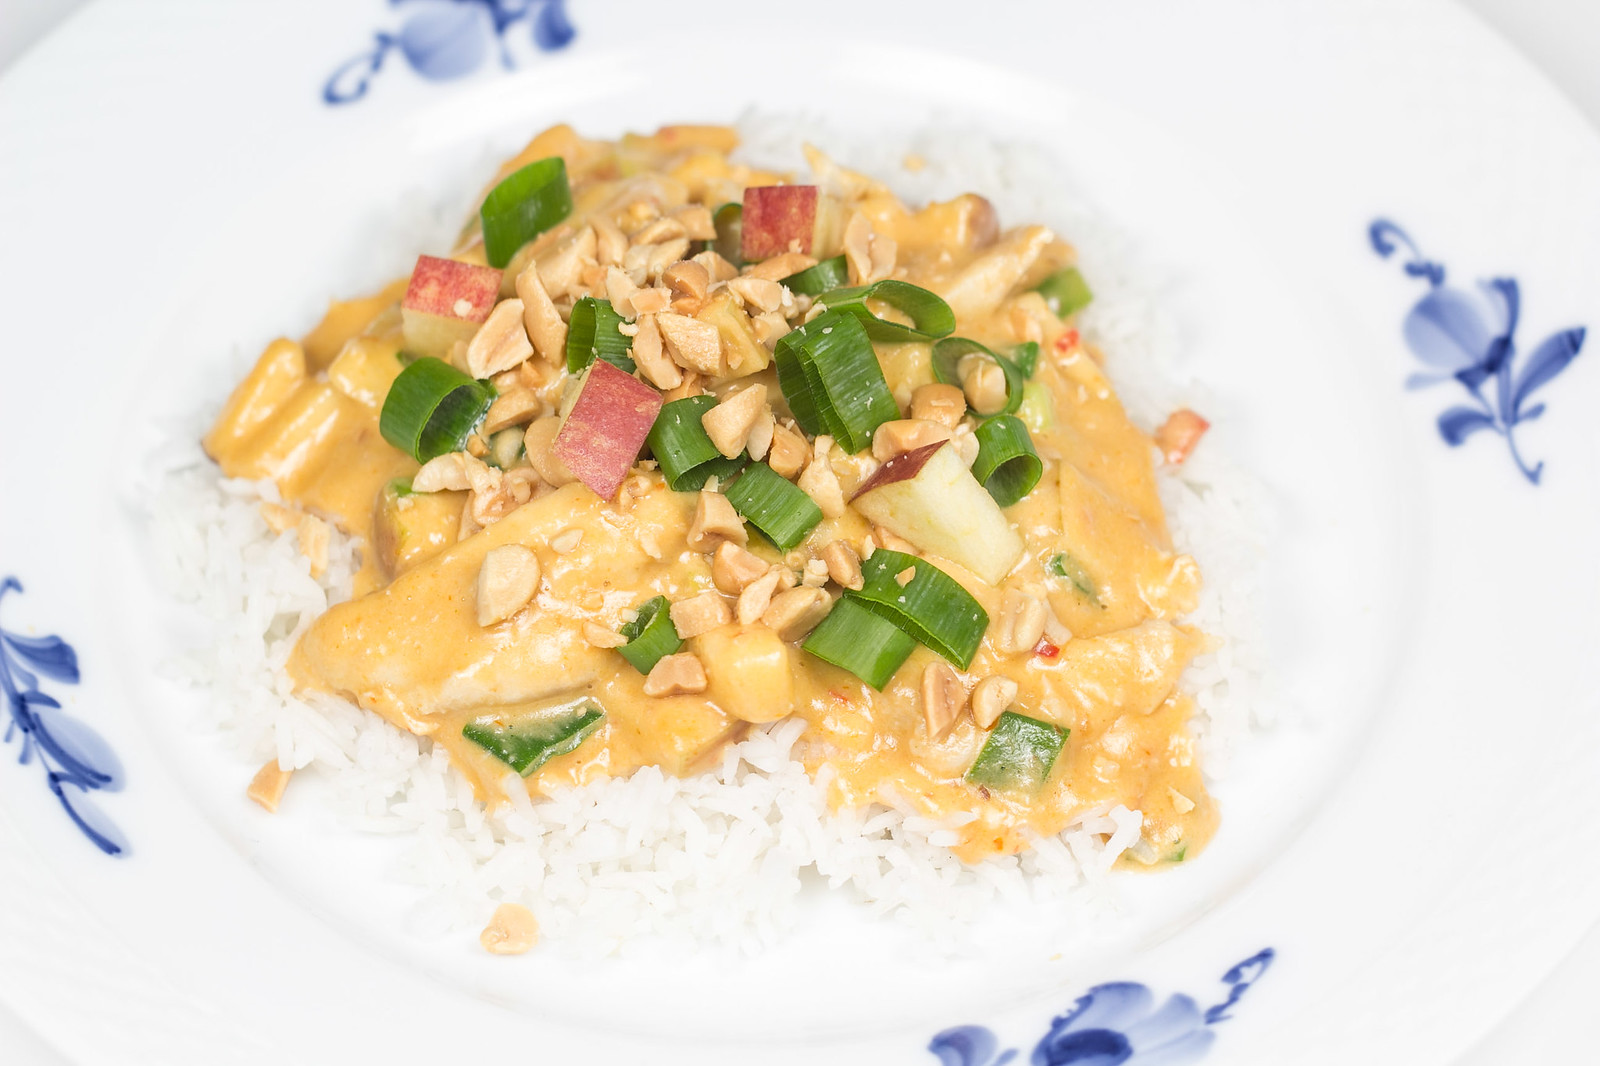 Recipe for Homemade Peanut Butter Chicken with Apples and Spring Onions